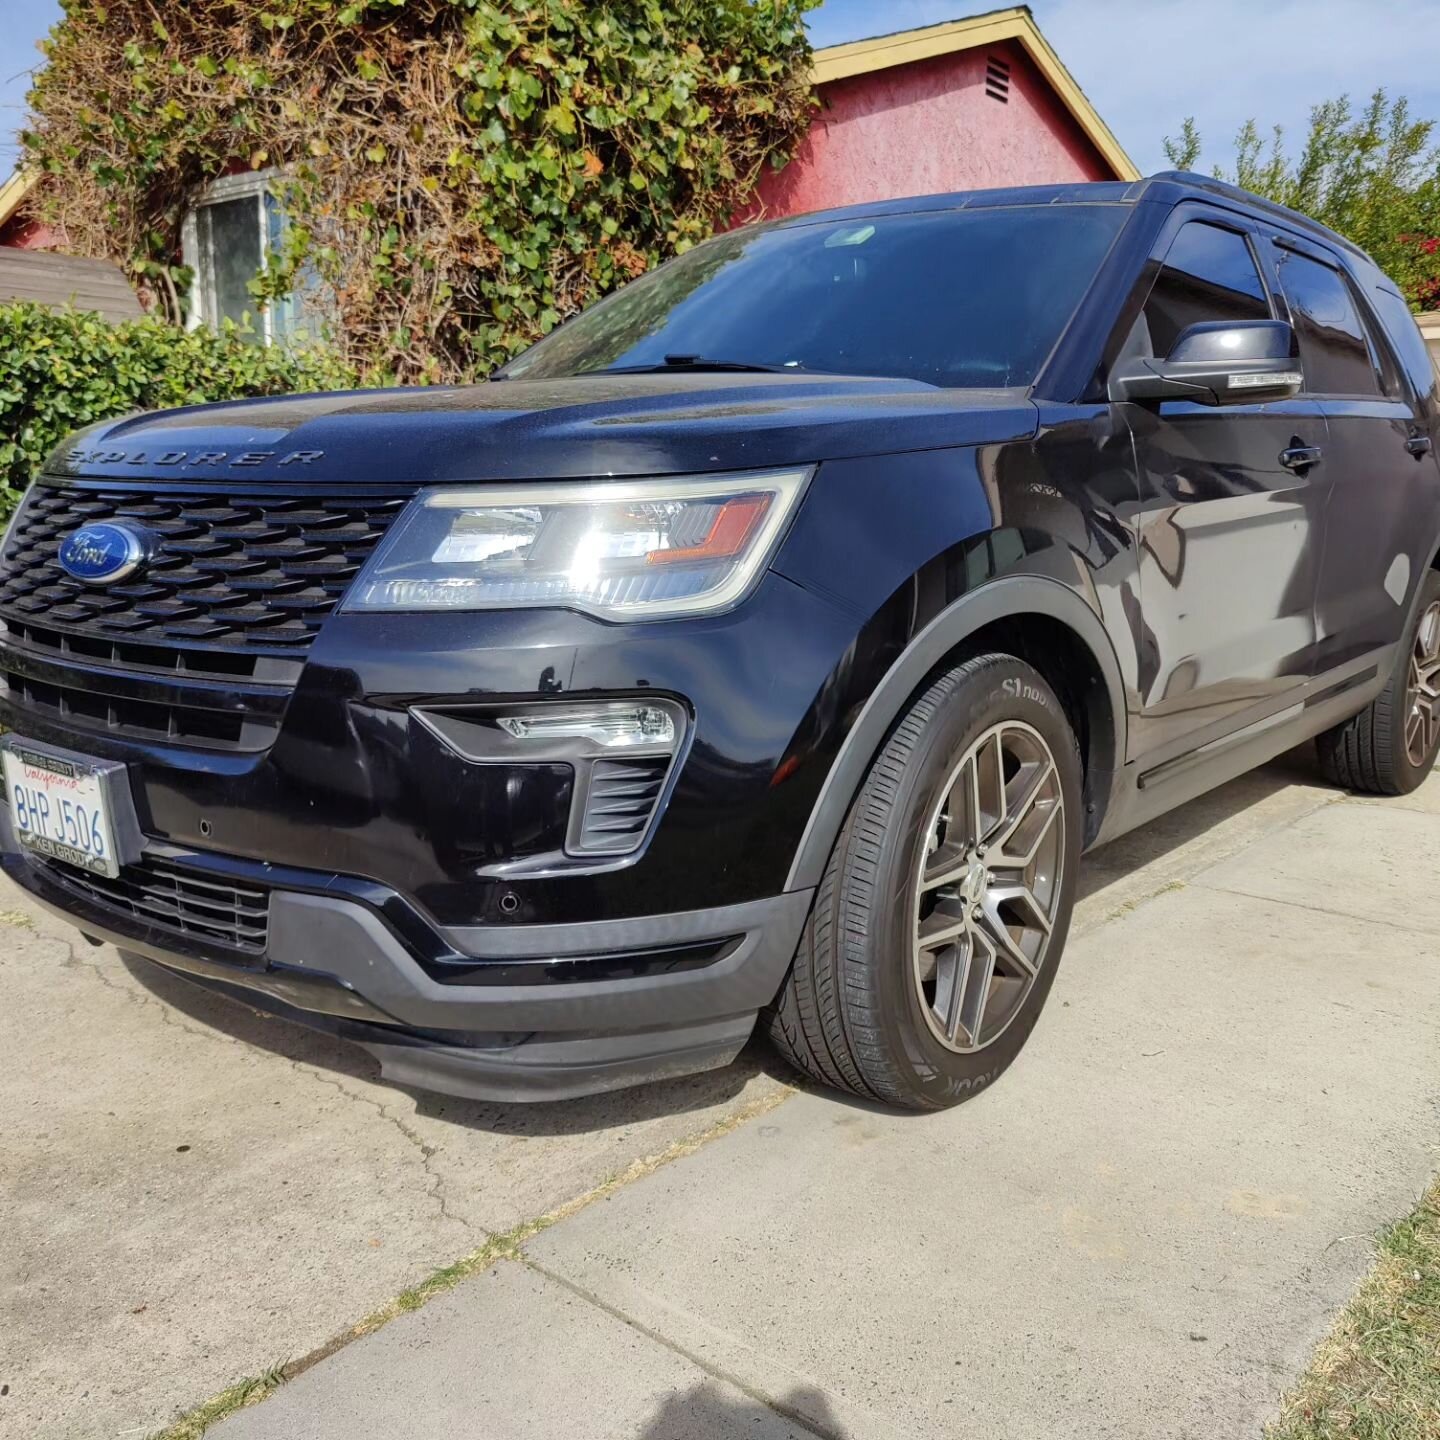 Basic Wash Package + Leather Conditioner on a Ford Explorer SUV. Beautiful before and After! Make sure you book your next wash with Geo's Mobile Auto Detailing whenever you need to get the shine on your vehicle back! Book now! 
.
.
.
.
.
.
.
.
.#deta